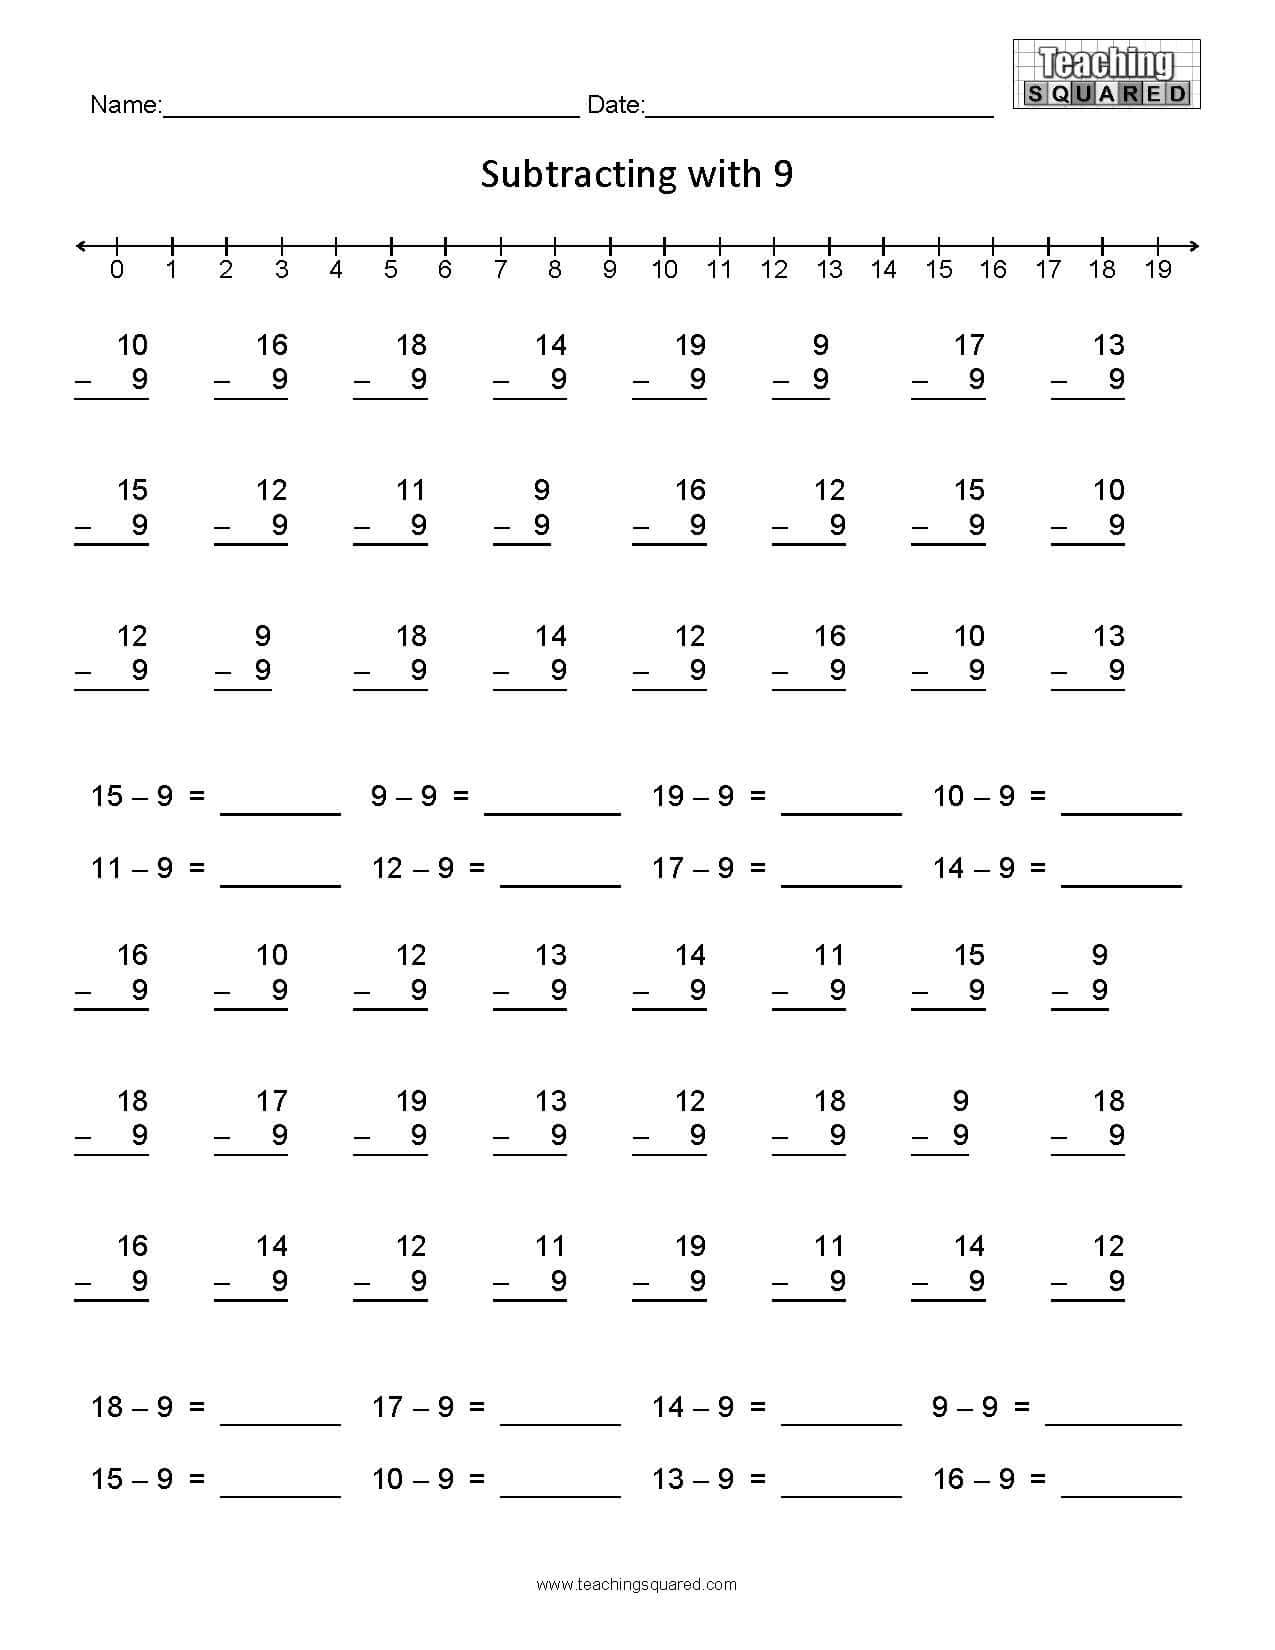 Learning Subtraction- Minus 9 teaching and homeschool worksheets